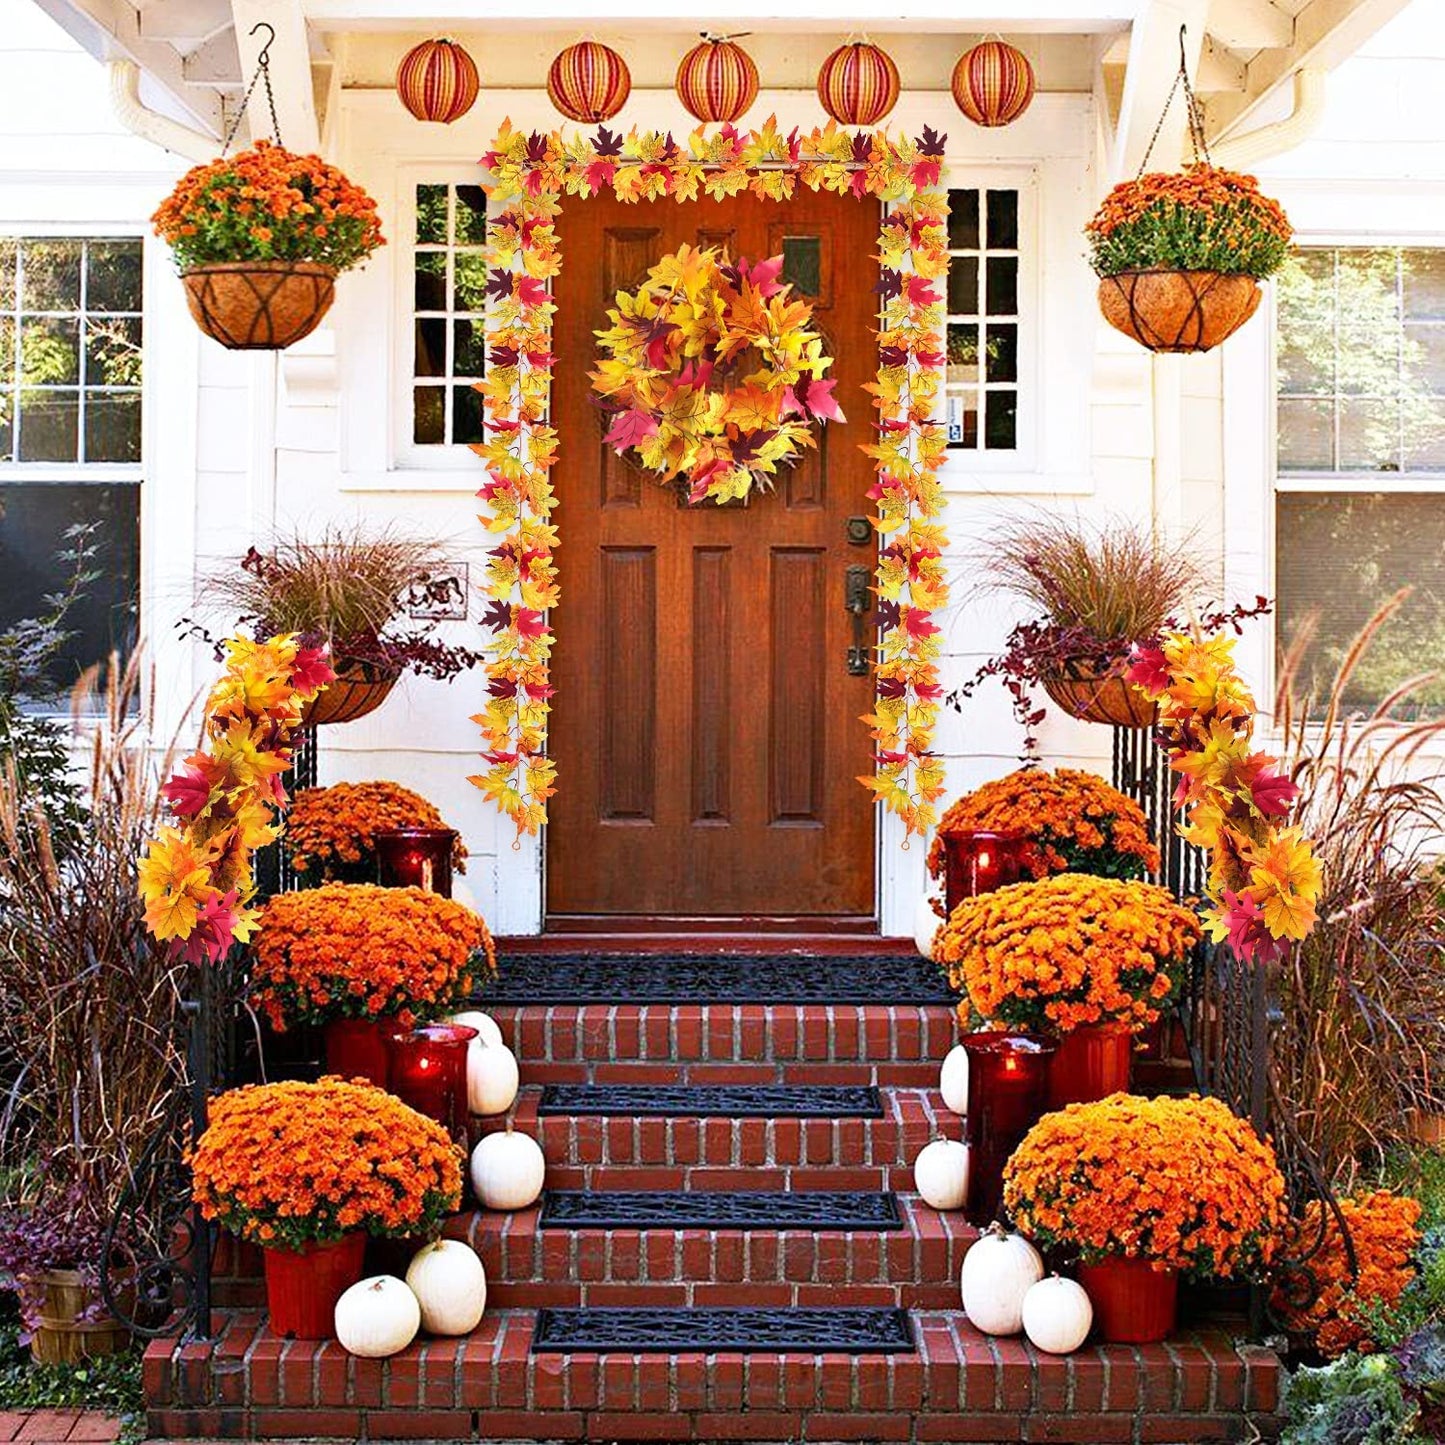 2 Pcs Fall Leaves Garland, 5.8Ft/Piece Artificial Hanging Autumn Maple Leaf Rattan Foliage Vines for Indoor Outdoor Harvest Thanksgiving Decoration